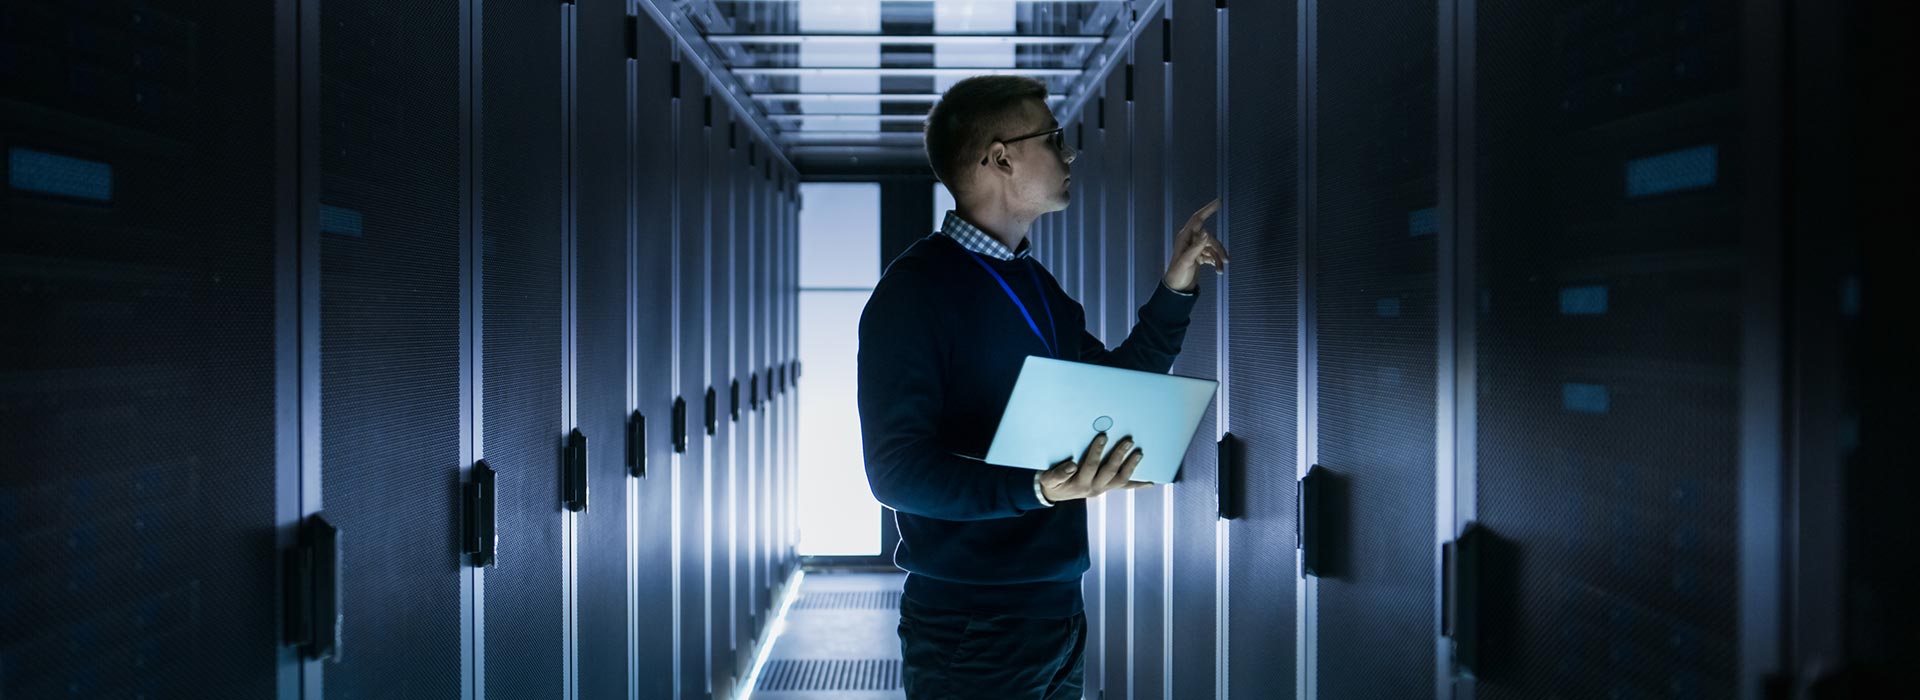 A darkened image of a man with a laptop inside a server room